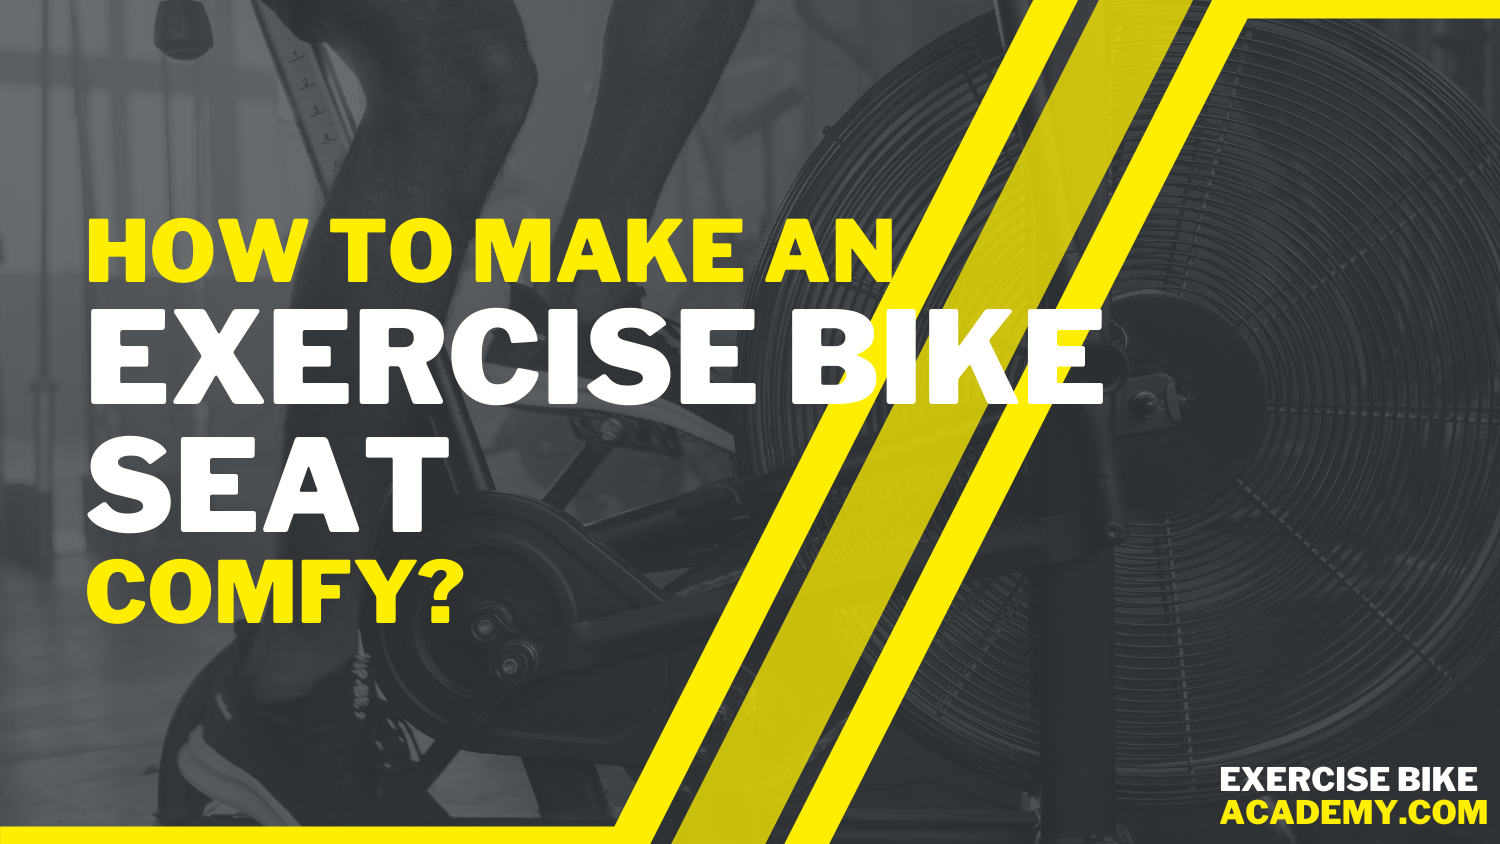 How to make an exercise bike more comfortable